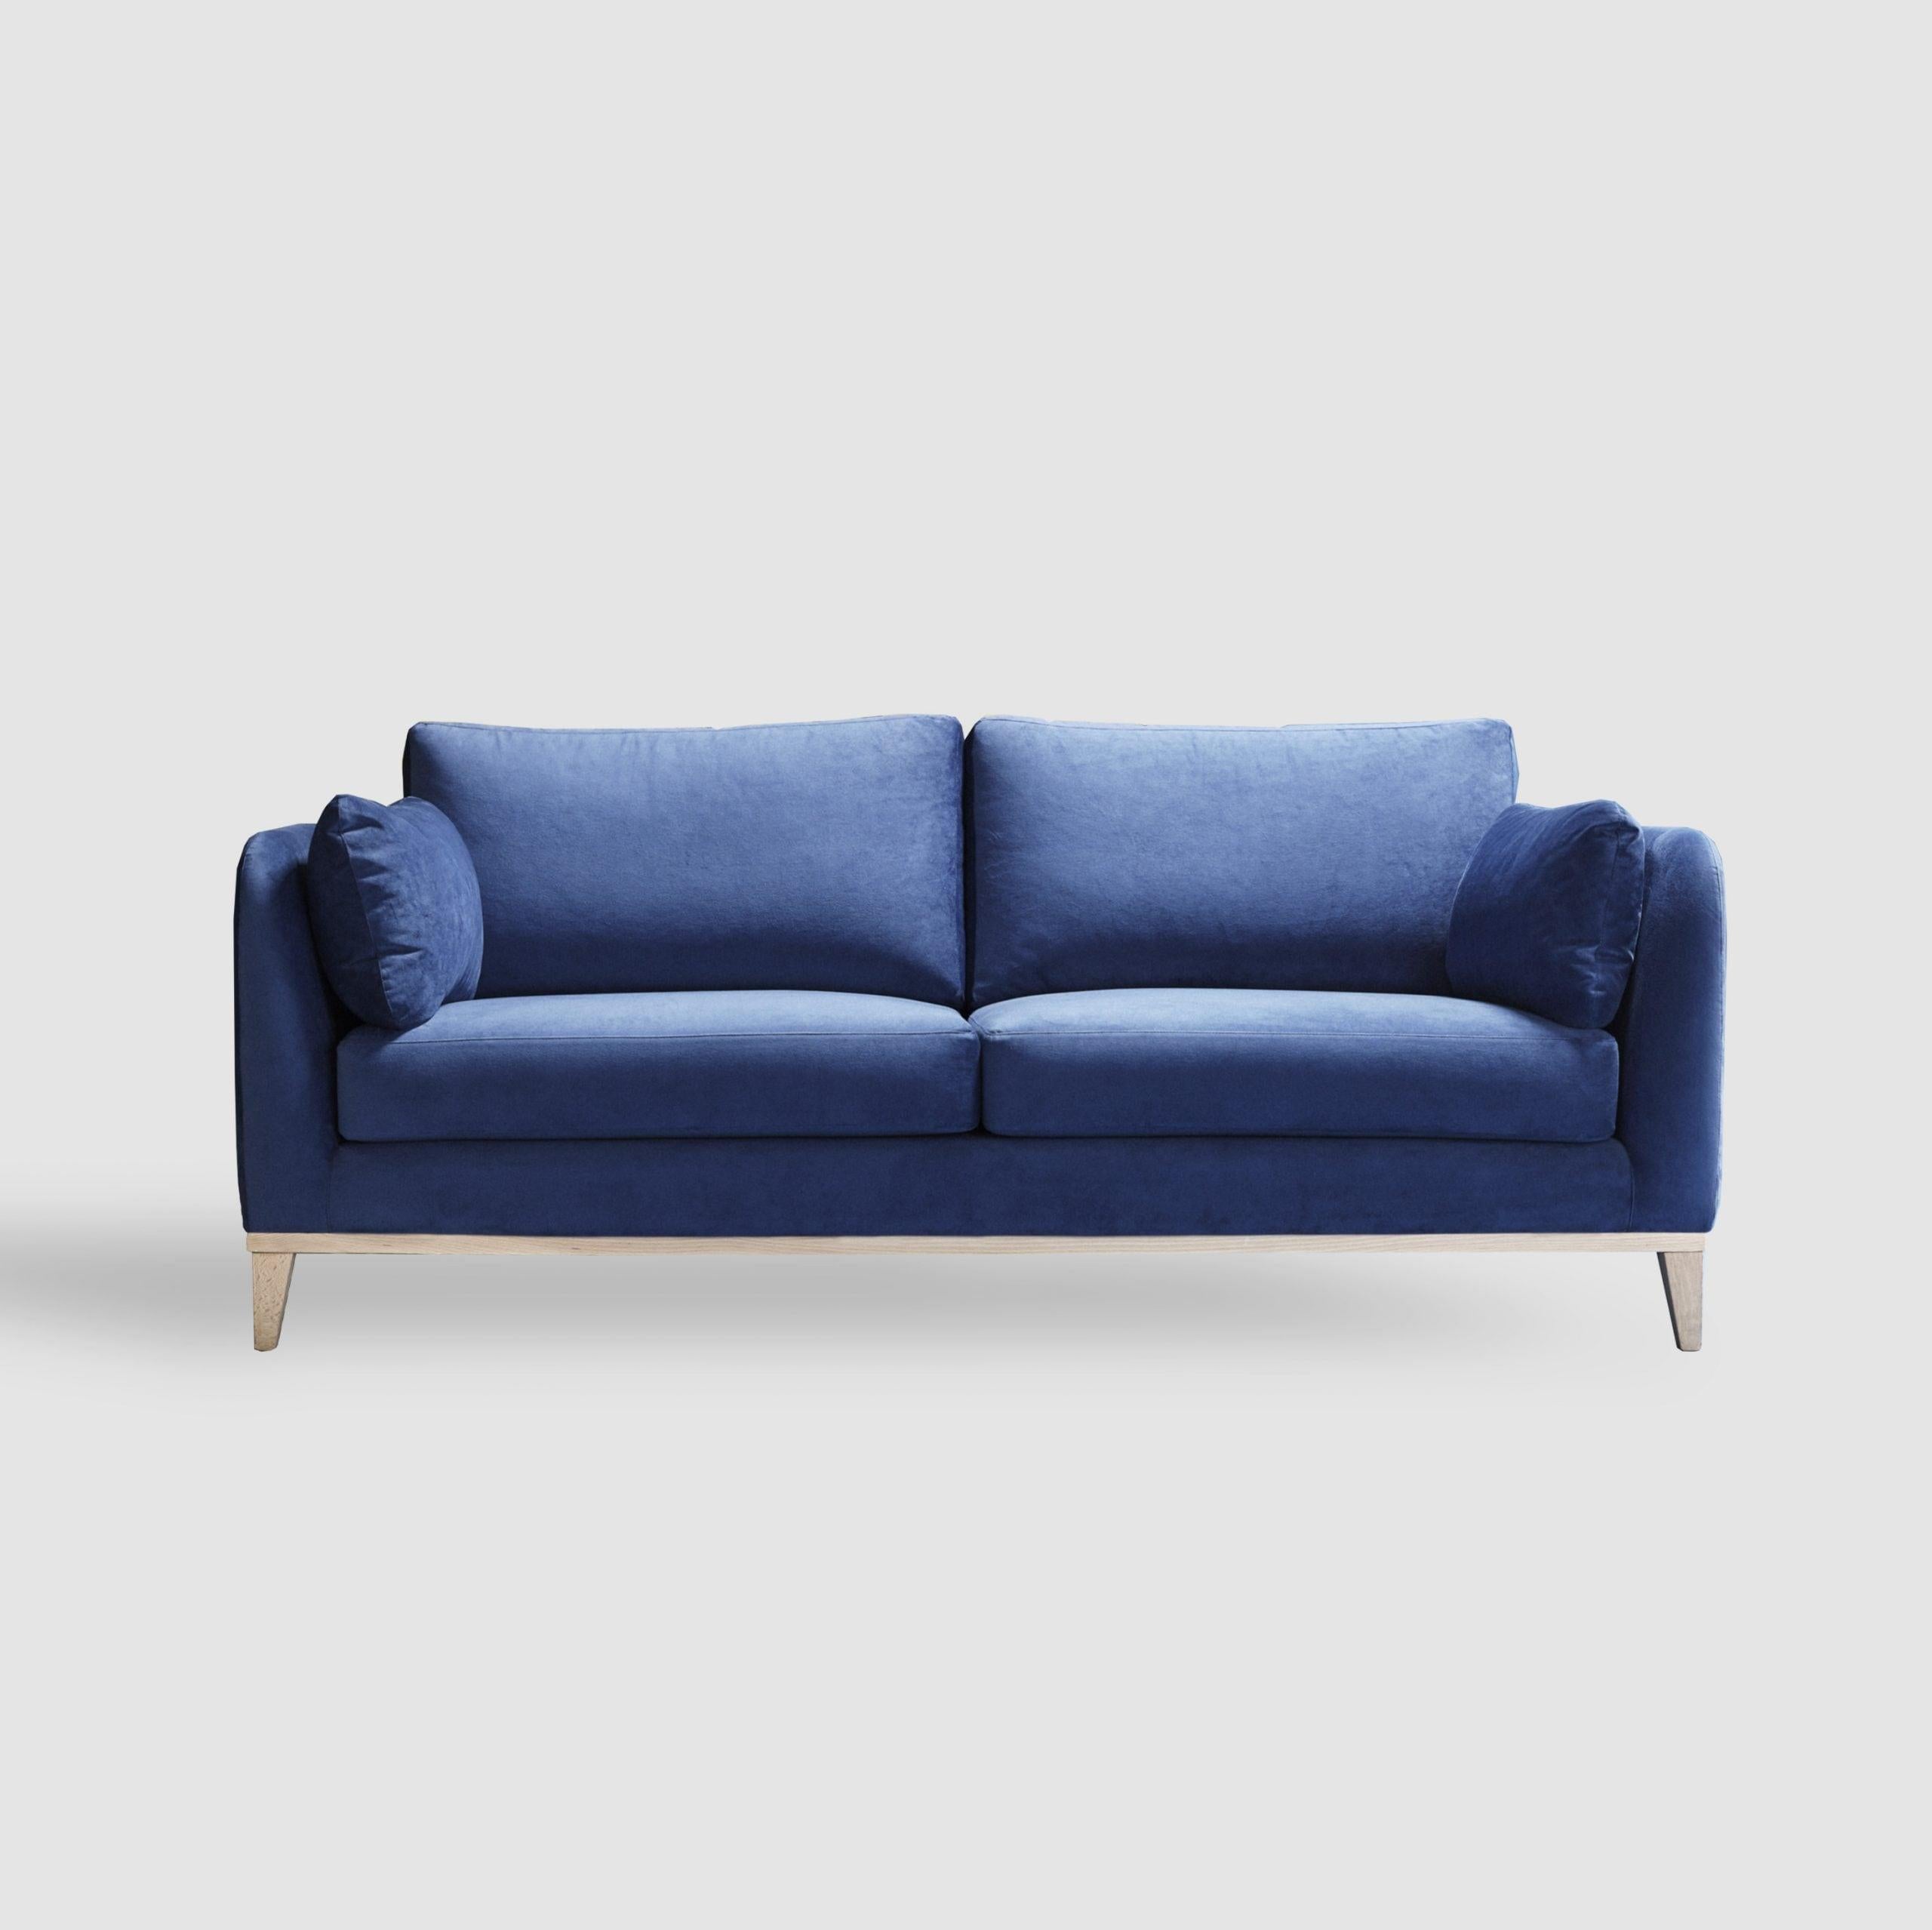 Novak sofa by Pepe Albargues
Dimensions: W 200 x D 96 x H 85 cm
Materials: Pine wood structure reinforced with plywood and tablex.
Seat CMHR (high resilence and flame retardant) for all our cushion filling systems.
Back cushions stuffed with 50%